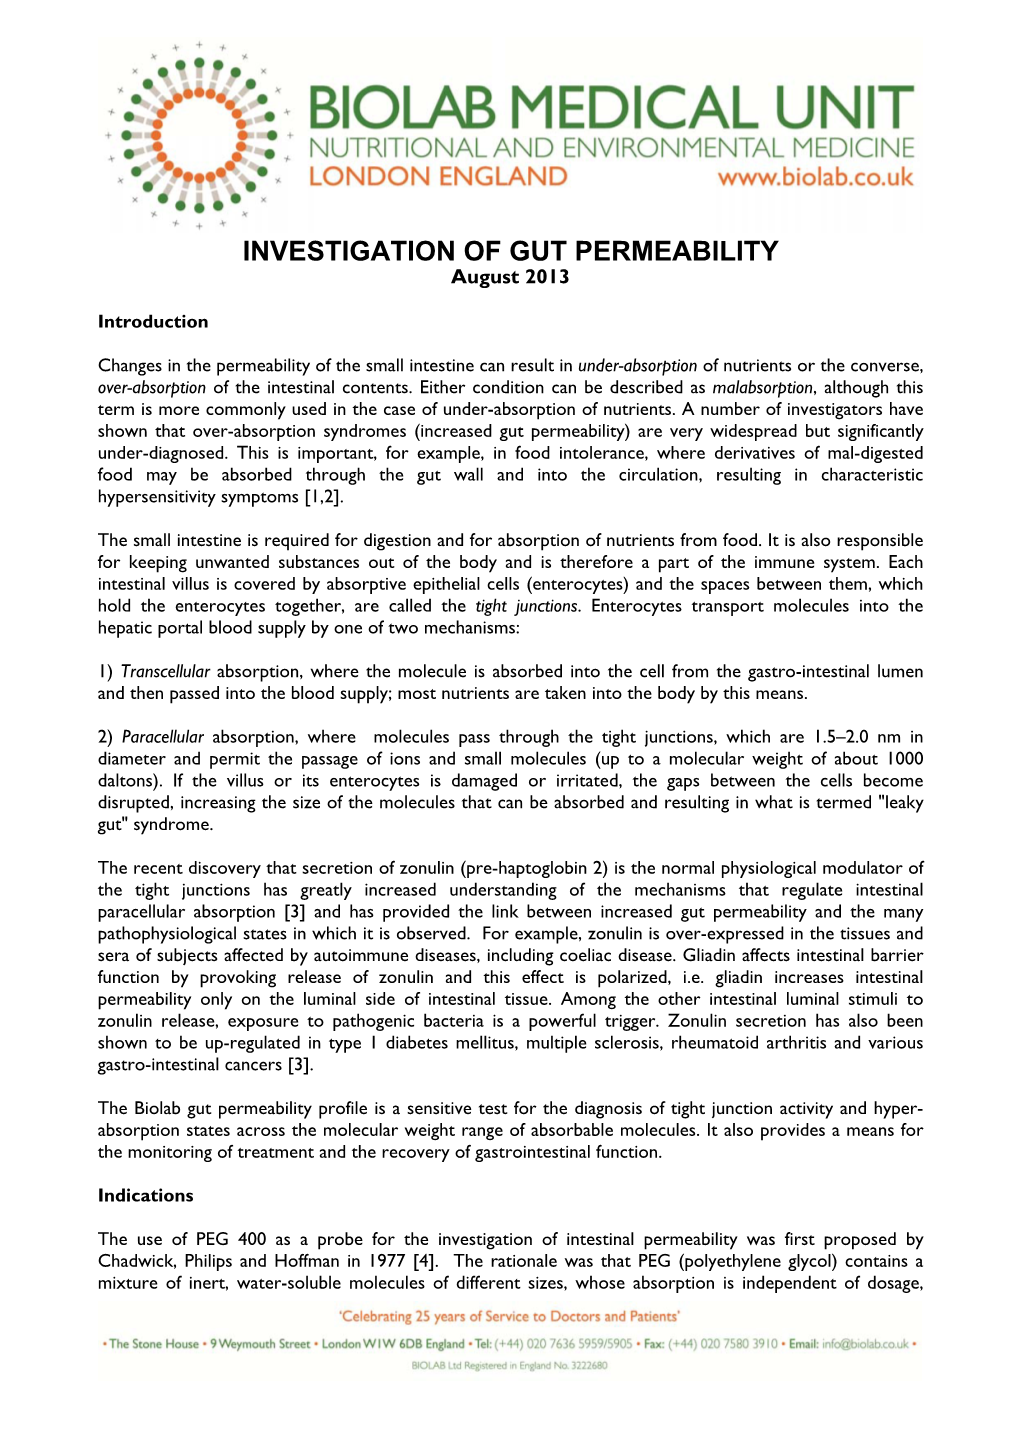 INVESTIGATION of GUT PERMEABILITY August 2013